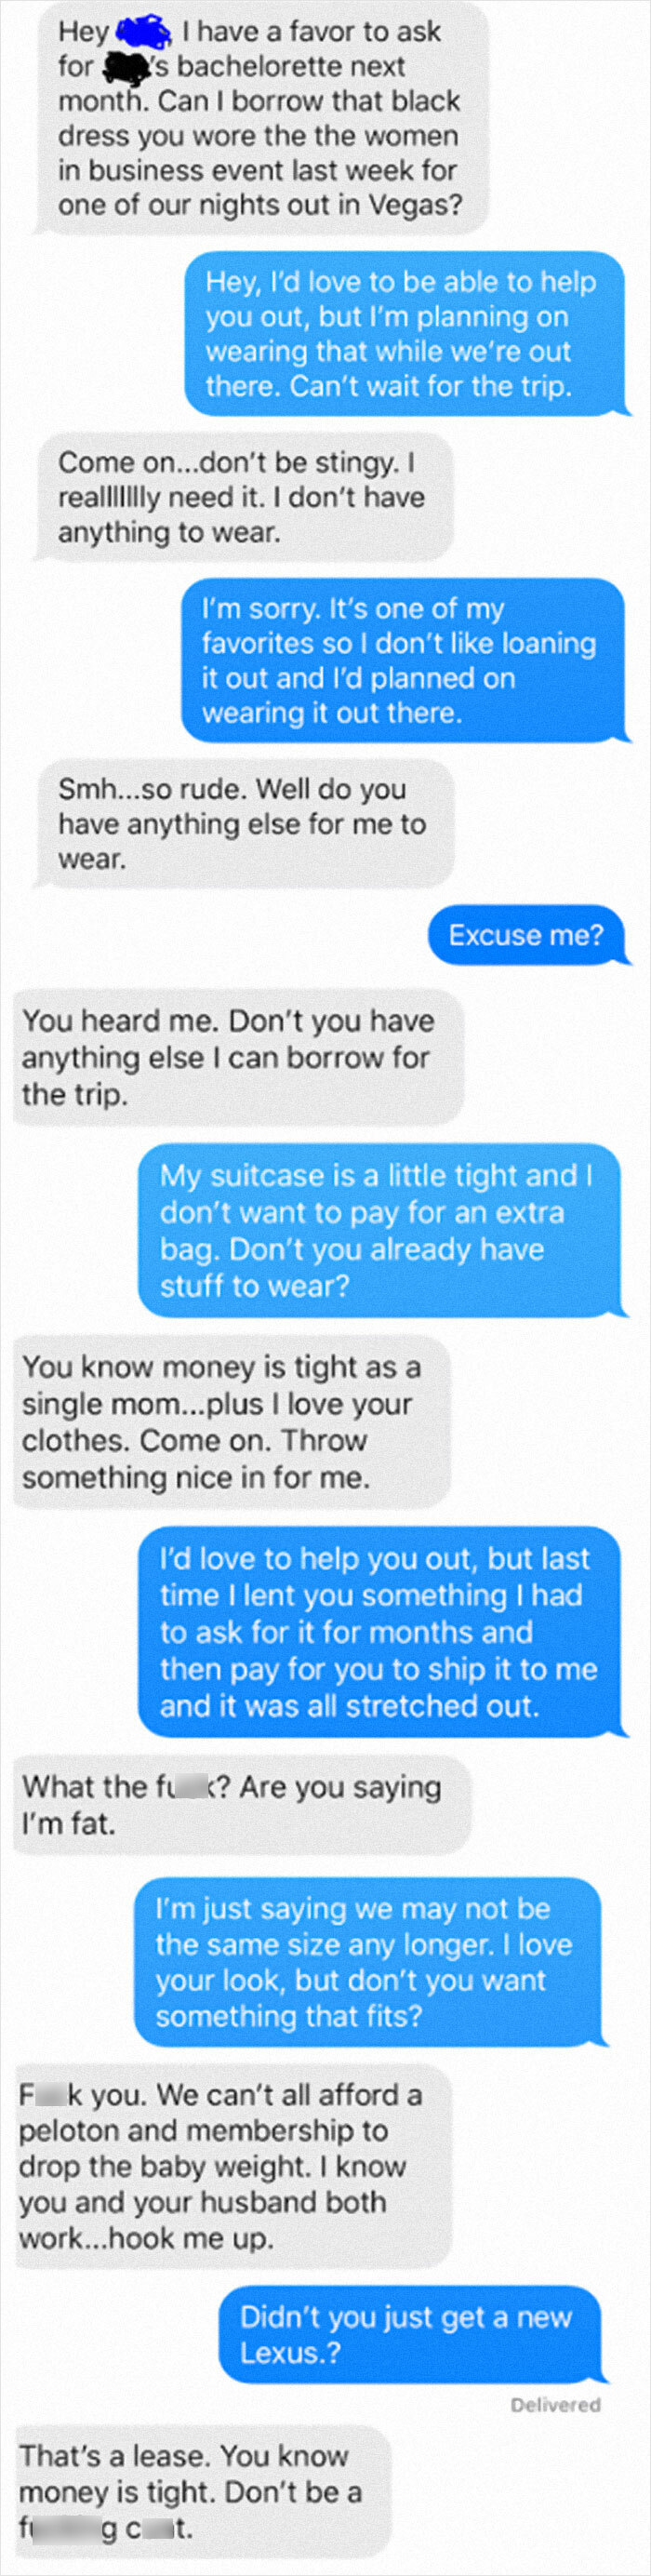 Wife's Choosing Beggar Friend Begging For Clothes For Vegas Bachelorette Party Even Though They're Not The Same Size